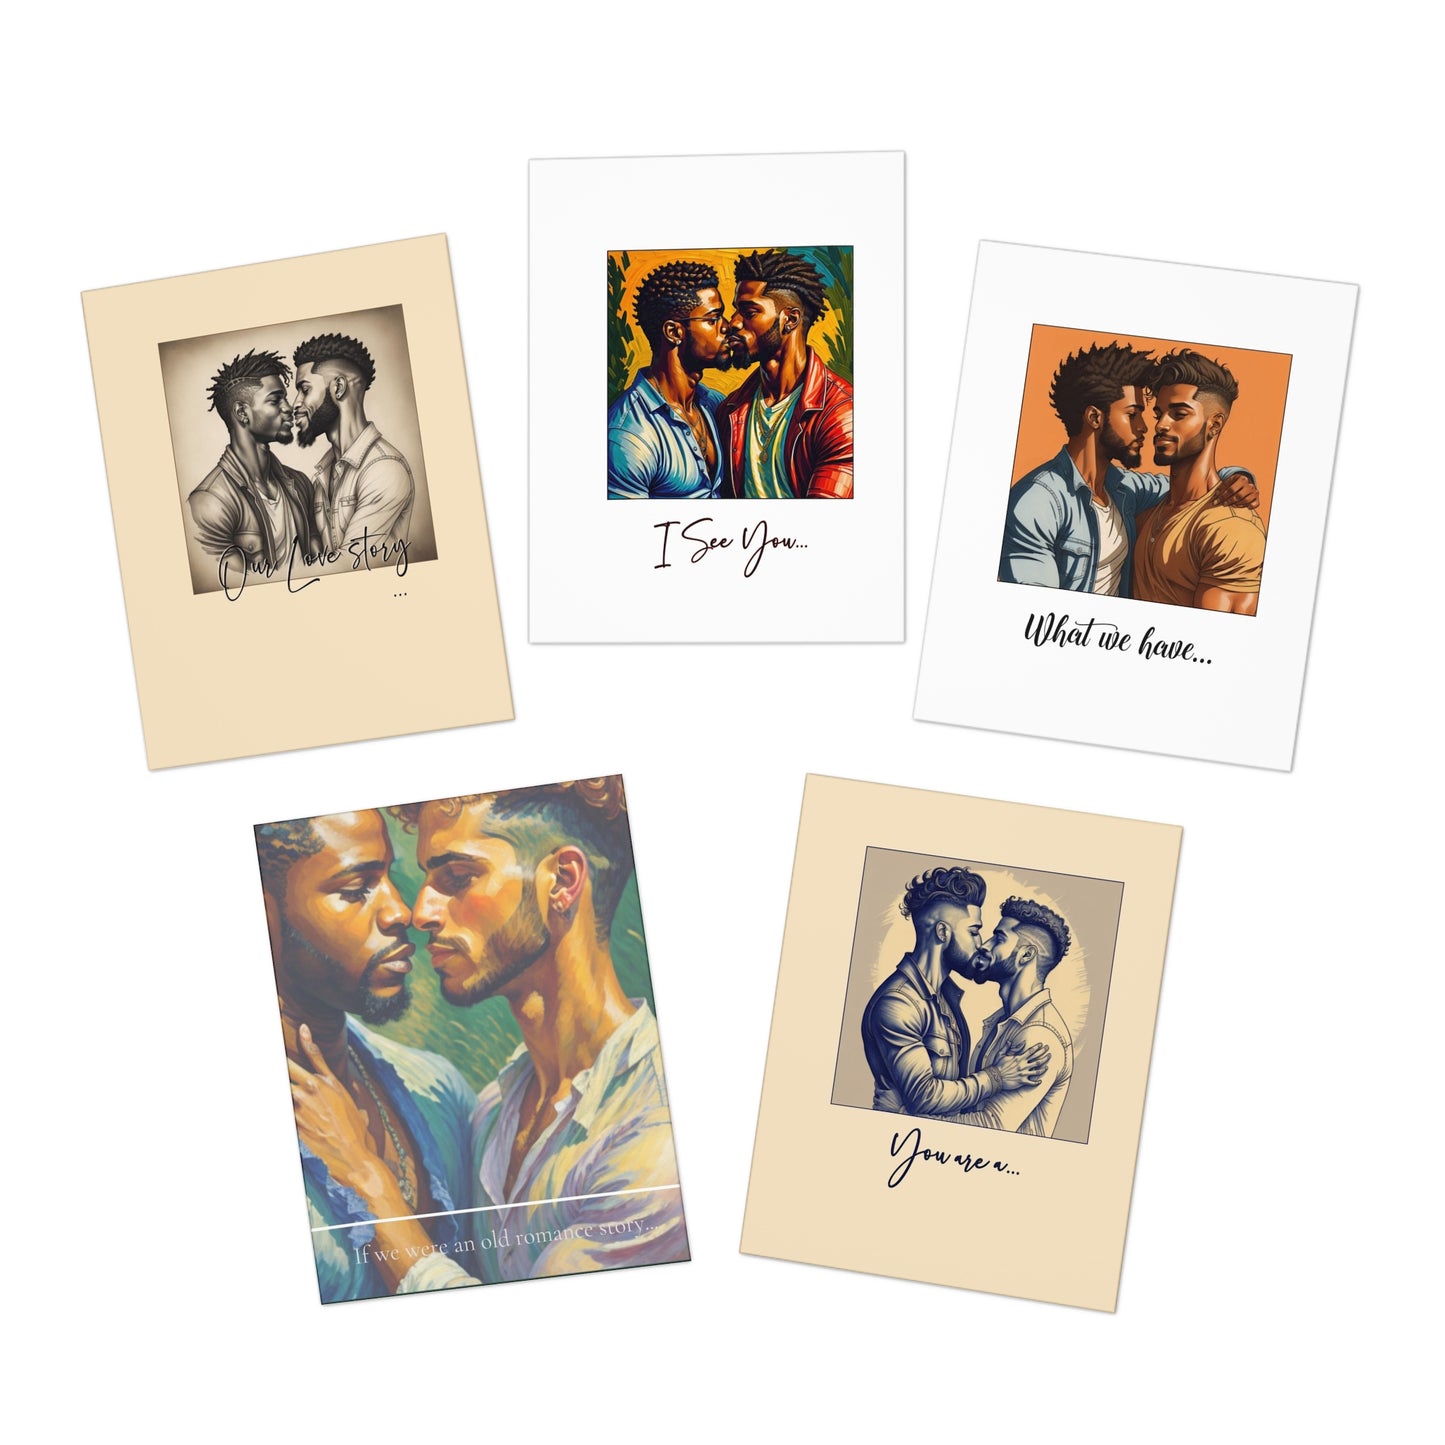 Male Couple Greeting Cards Option 4-Special Occasion-Gay Couple featuring two men-Multi-Design Greeting Cards (5-Pack)-LGBTQ+ Holiday Cards